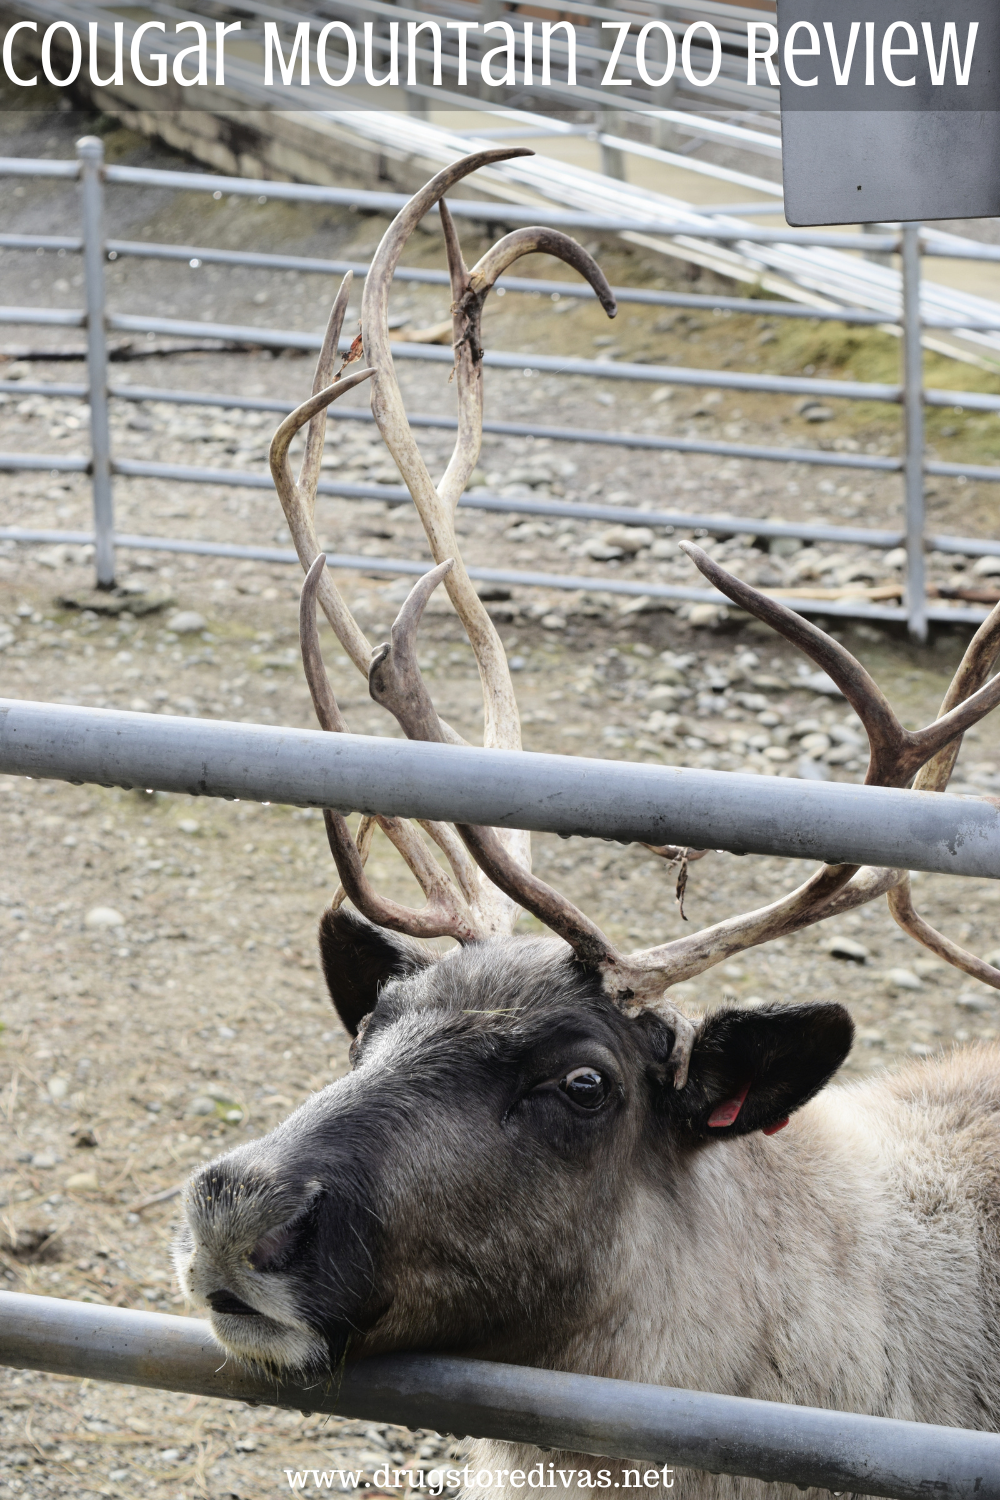 A reindeer in a zoo exhibit with the words 